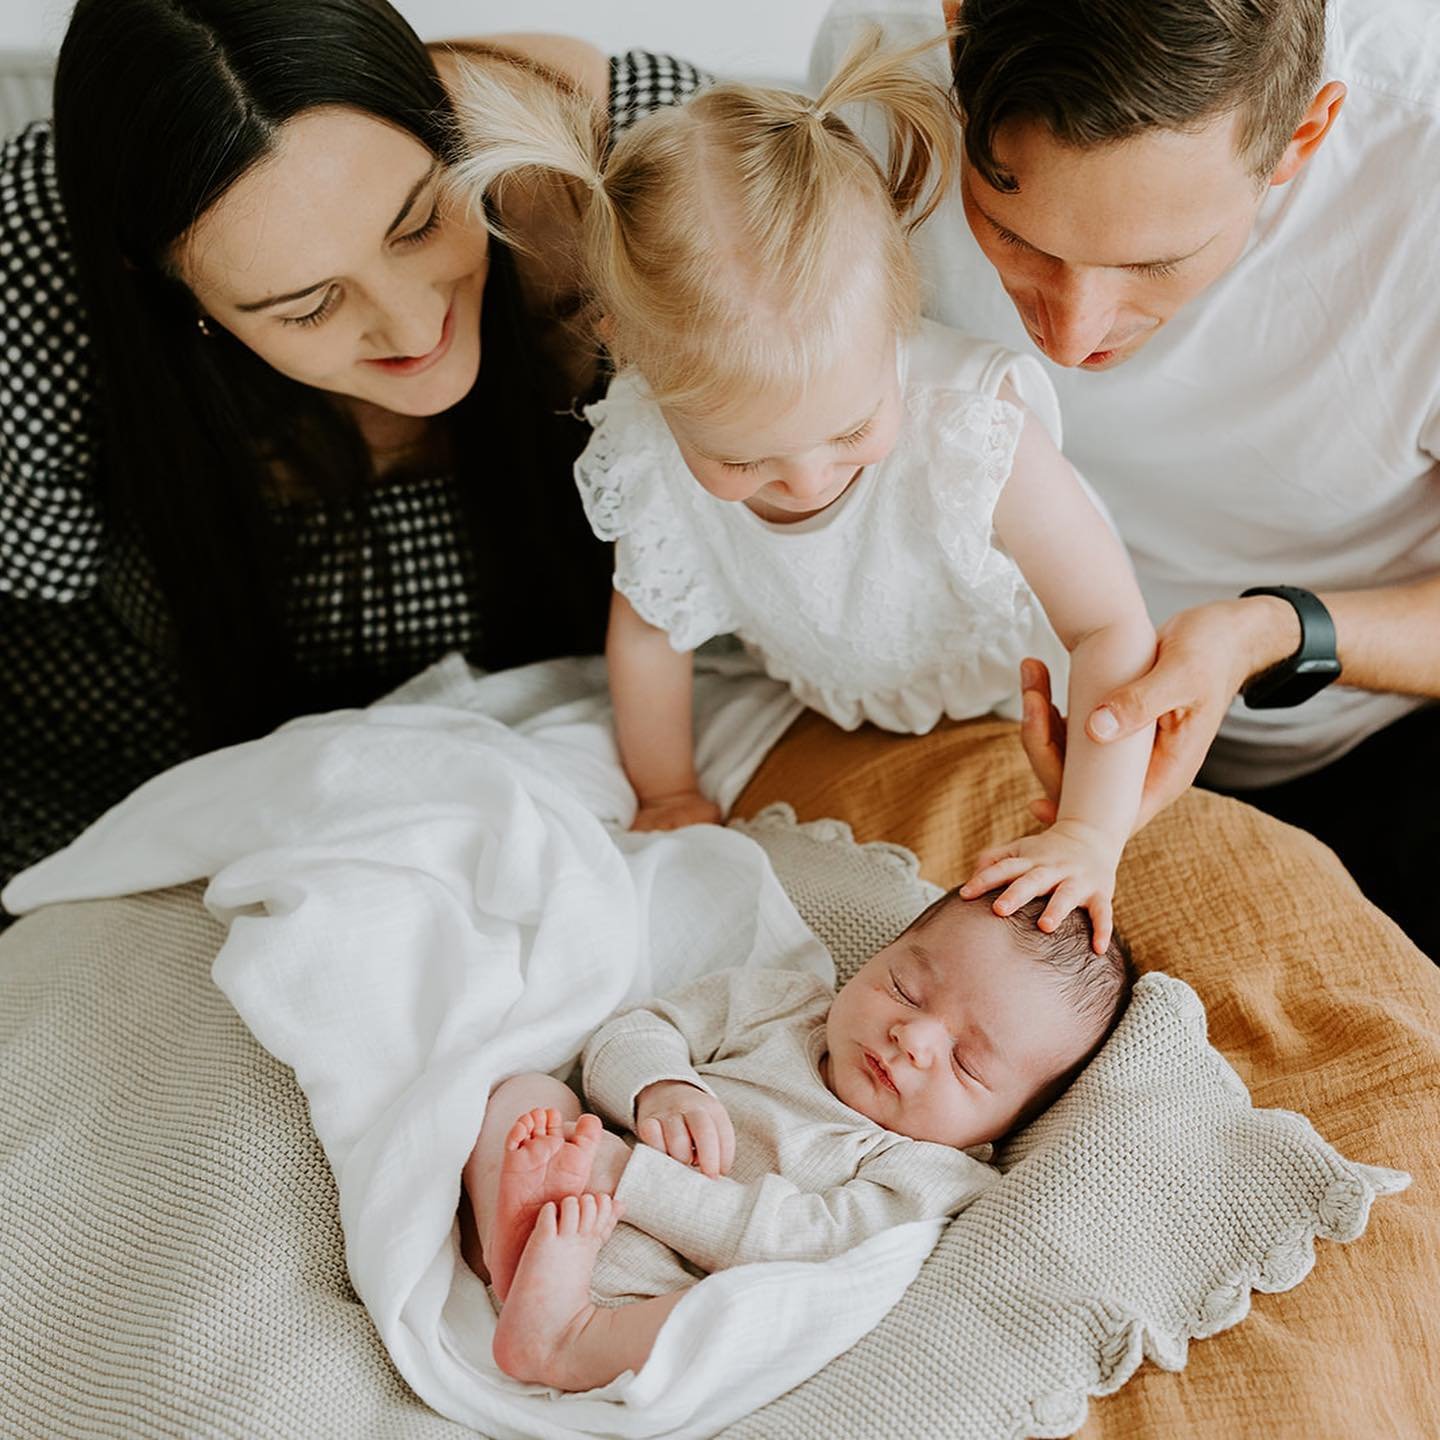 Always so grateful for return clients and the joy that it brings in being able to share in their joy!

Our fourth shoot together, this time Rach &amp; Cam had TWO small people in tow. The last time I saw them was only a few weeks after I started work